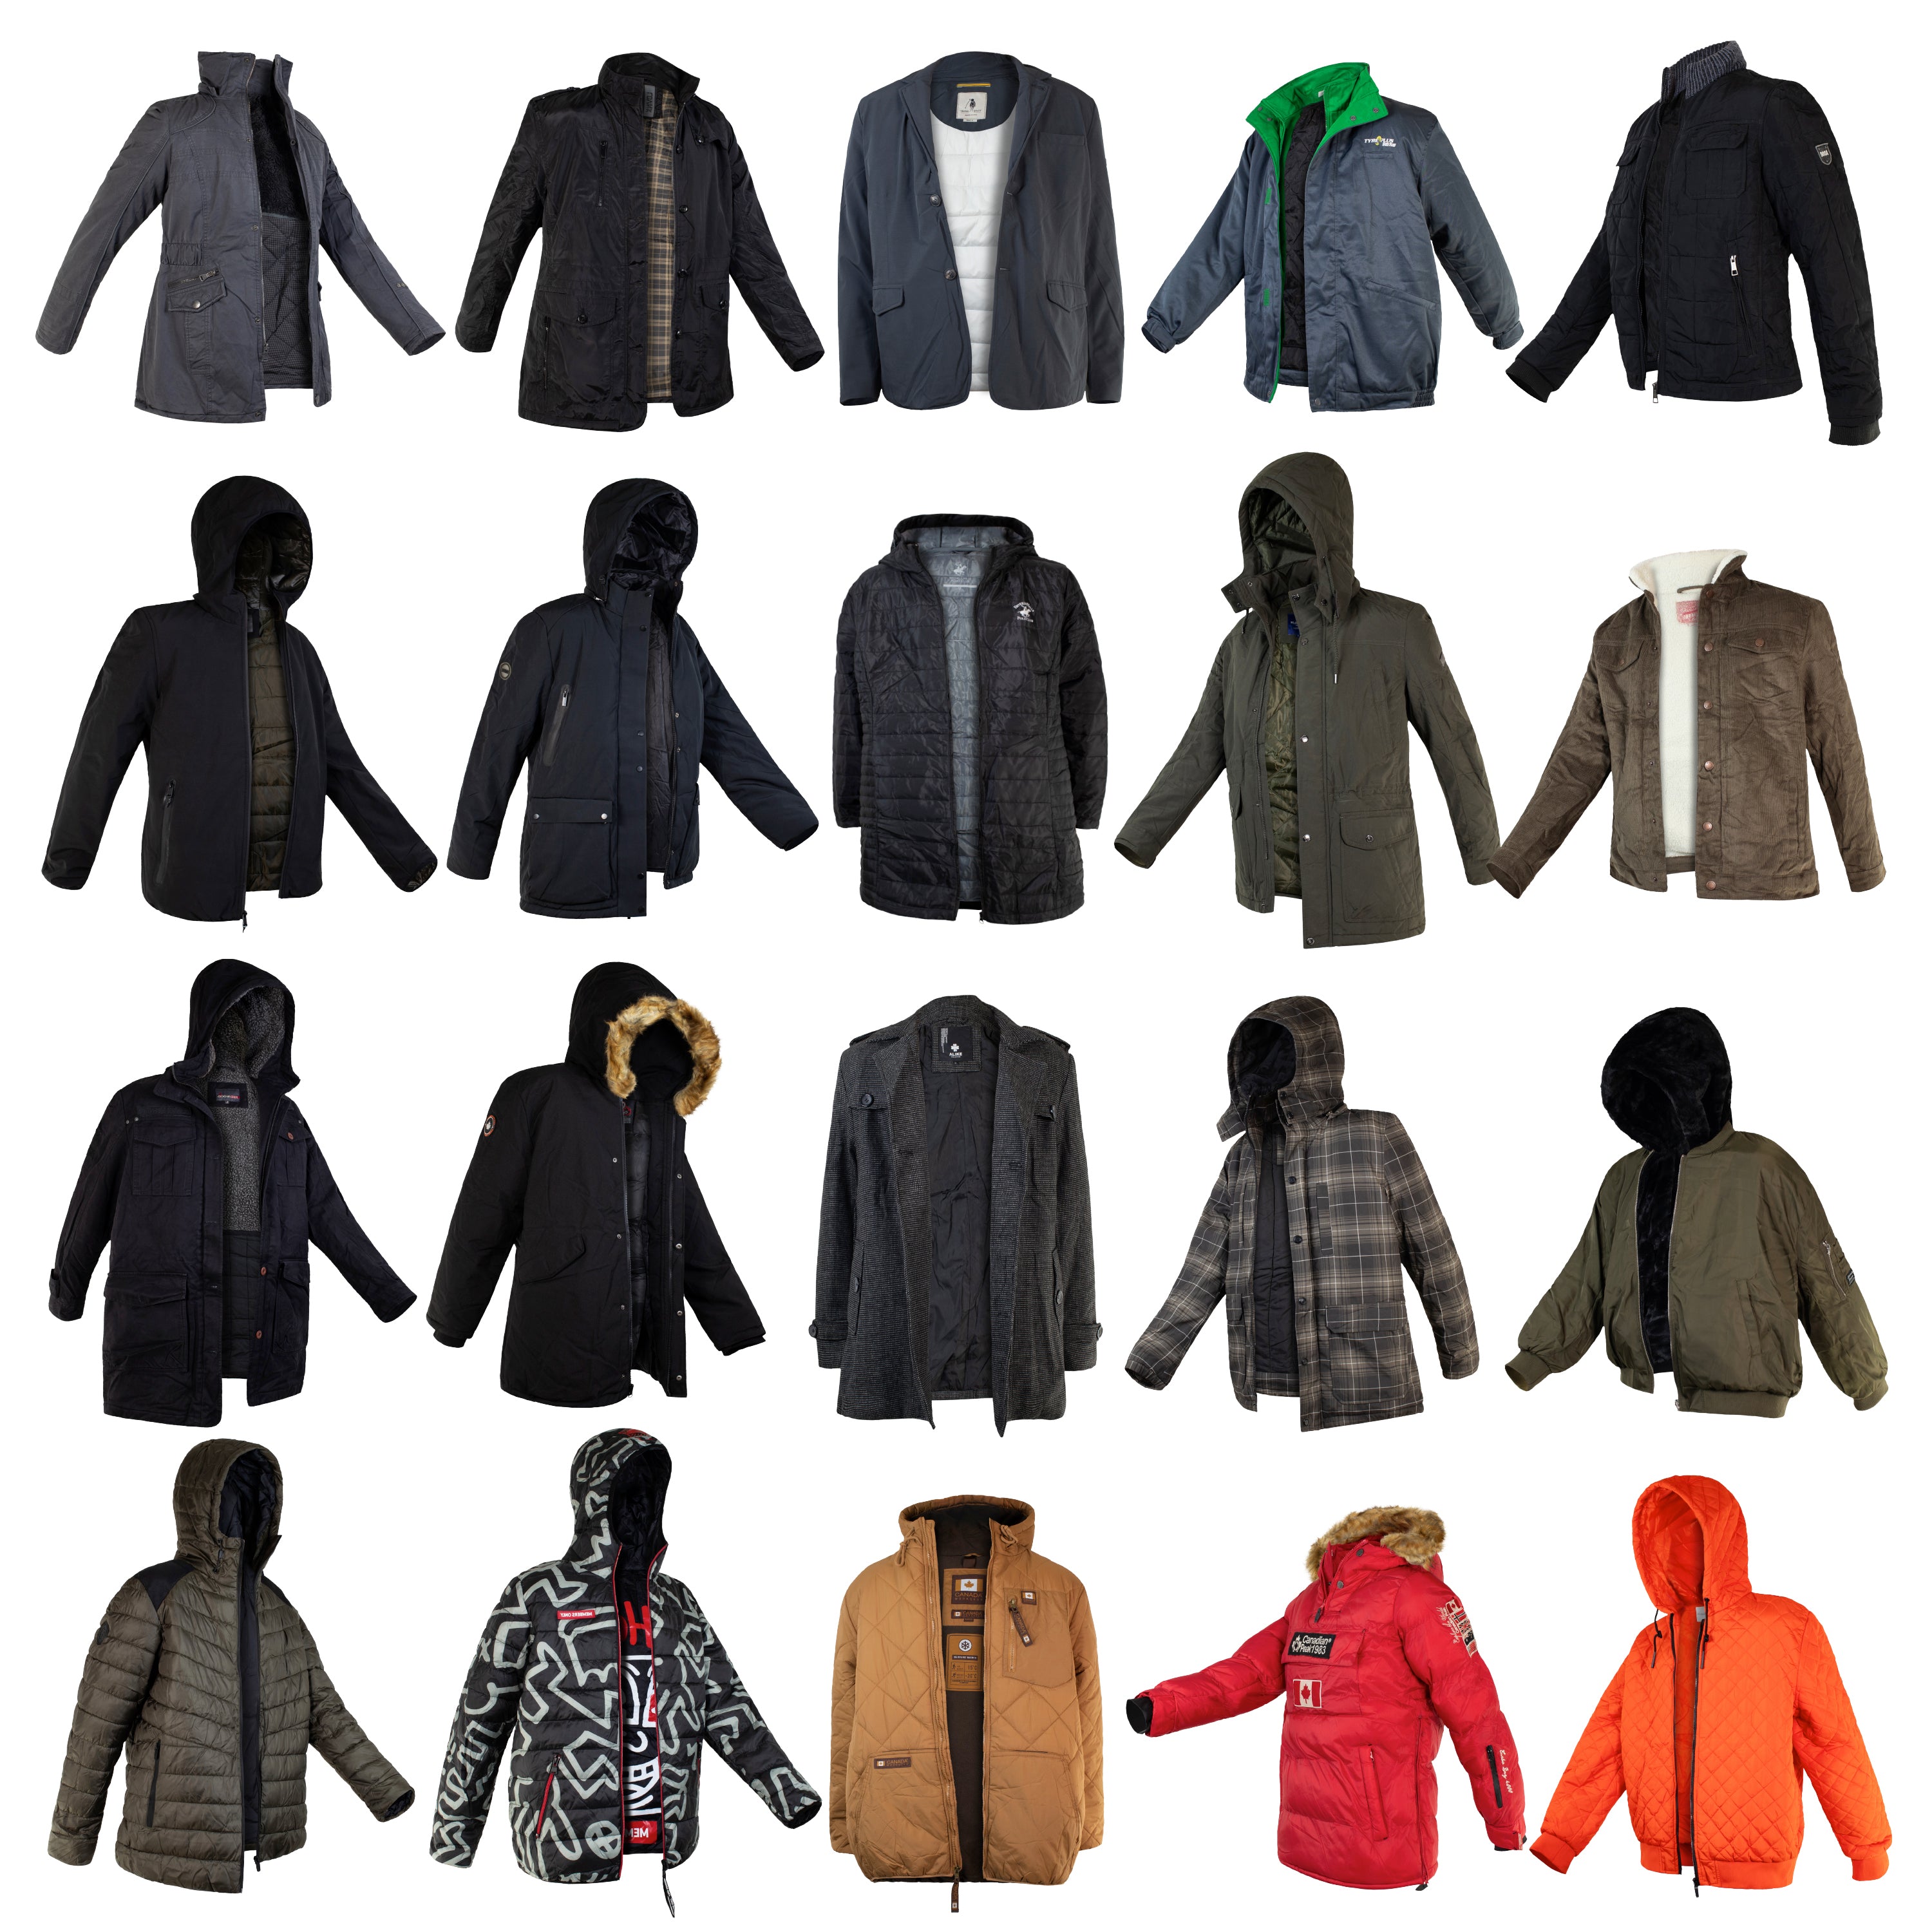 Wholesale Jackets for Homeless Donations & Charity